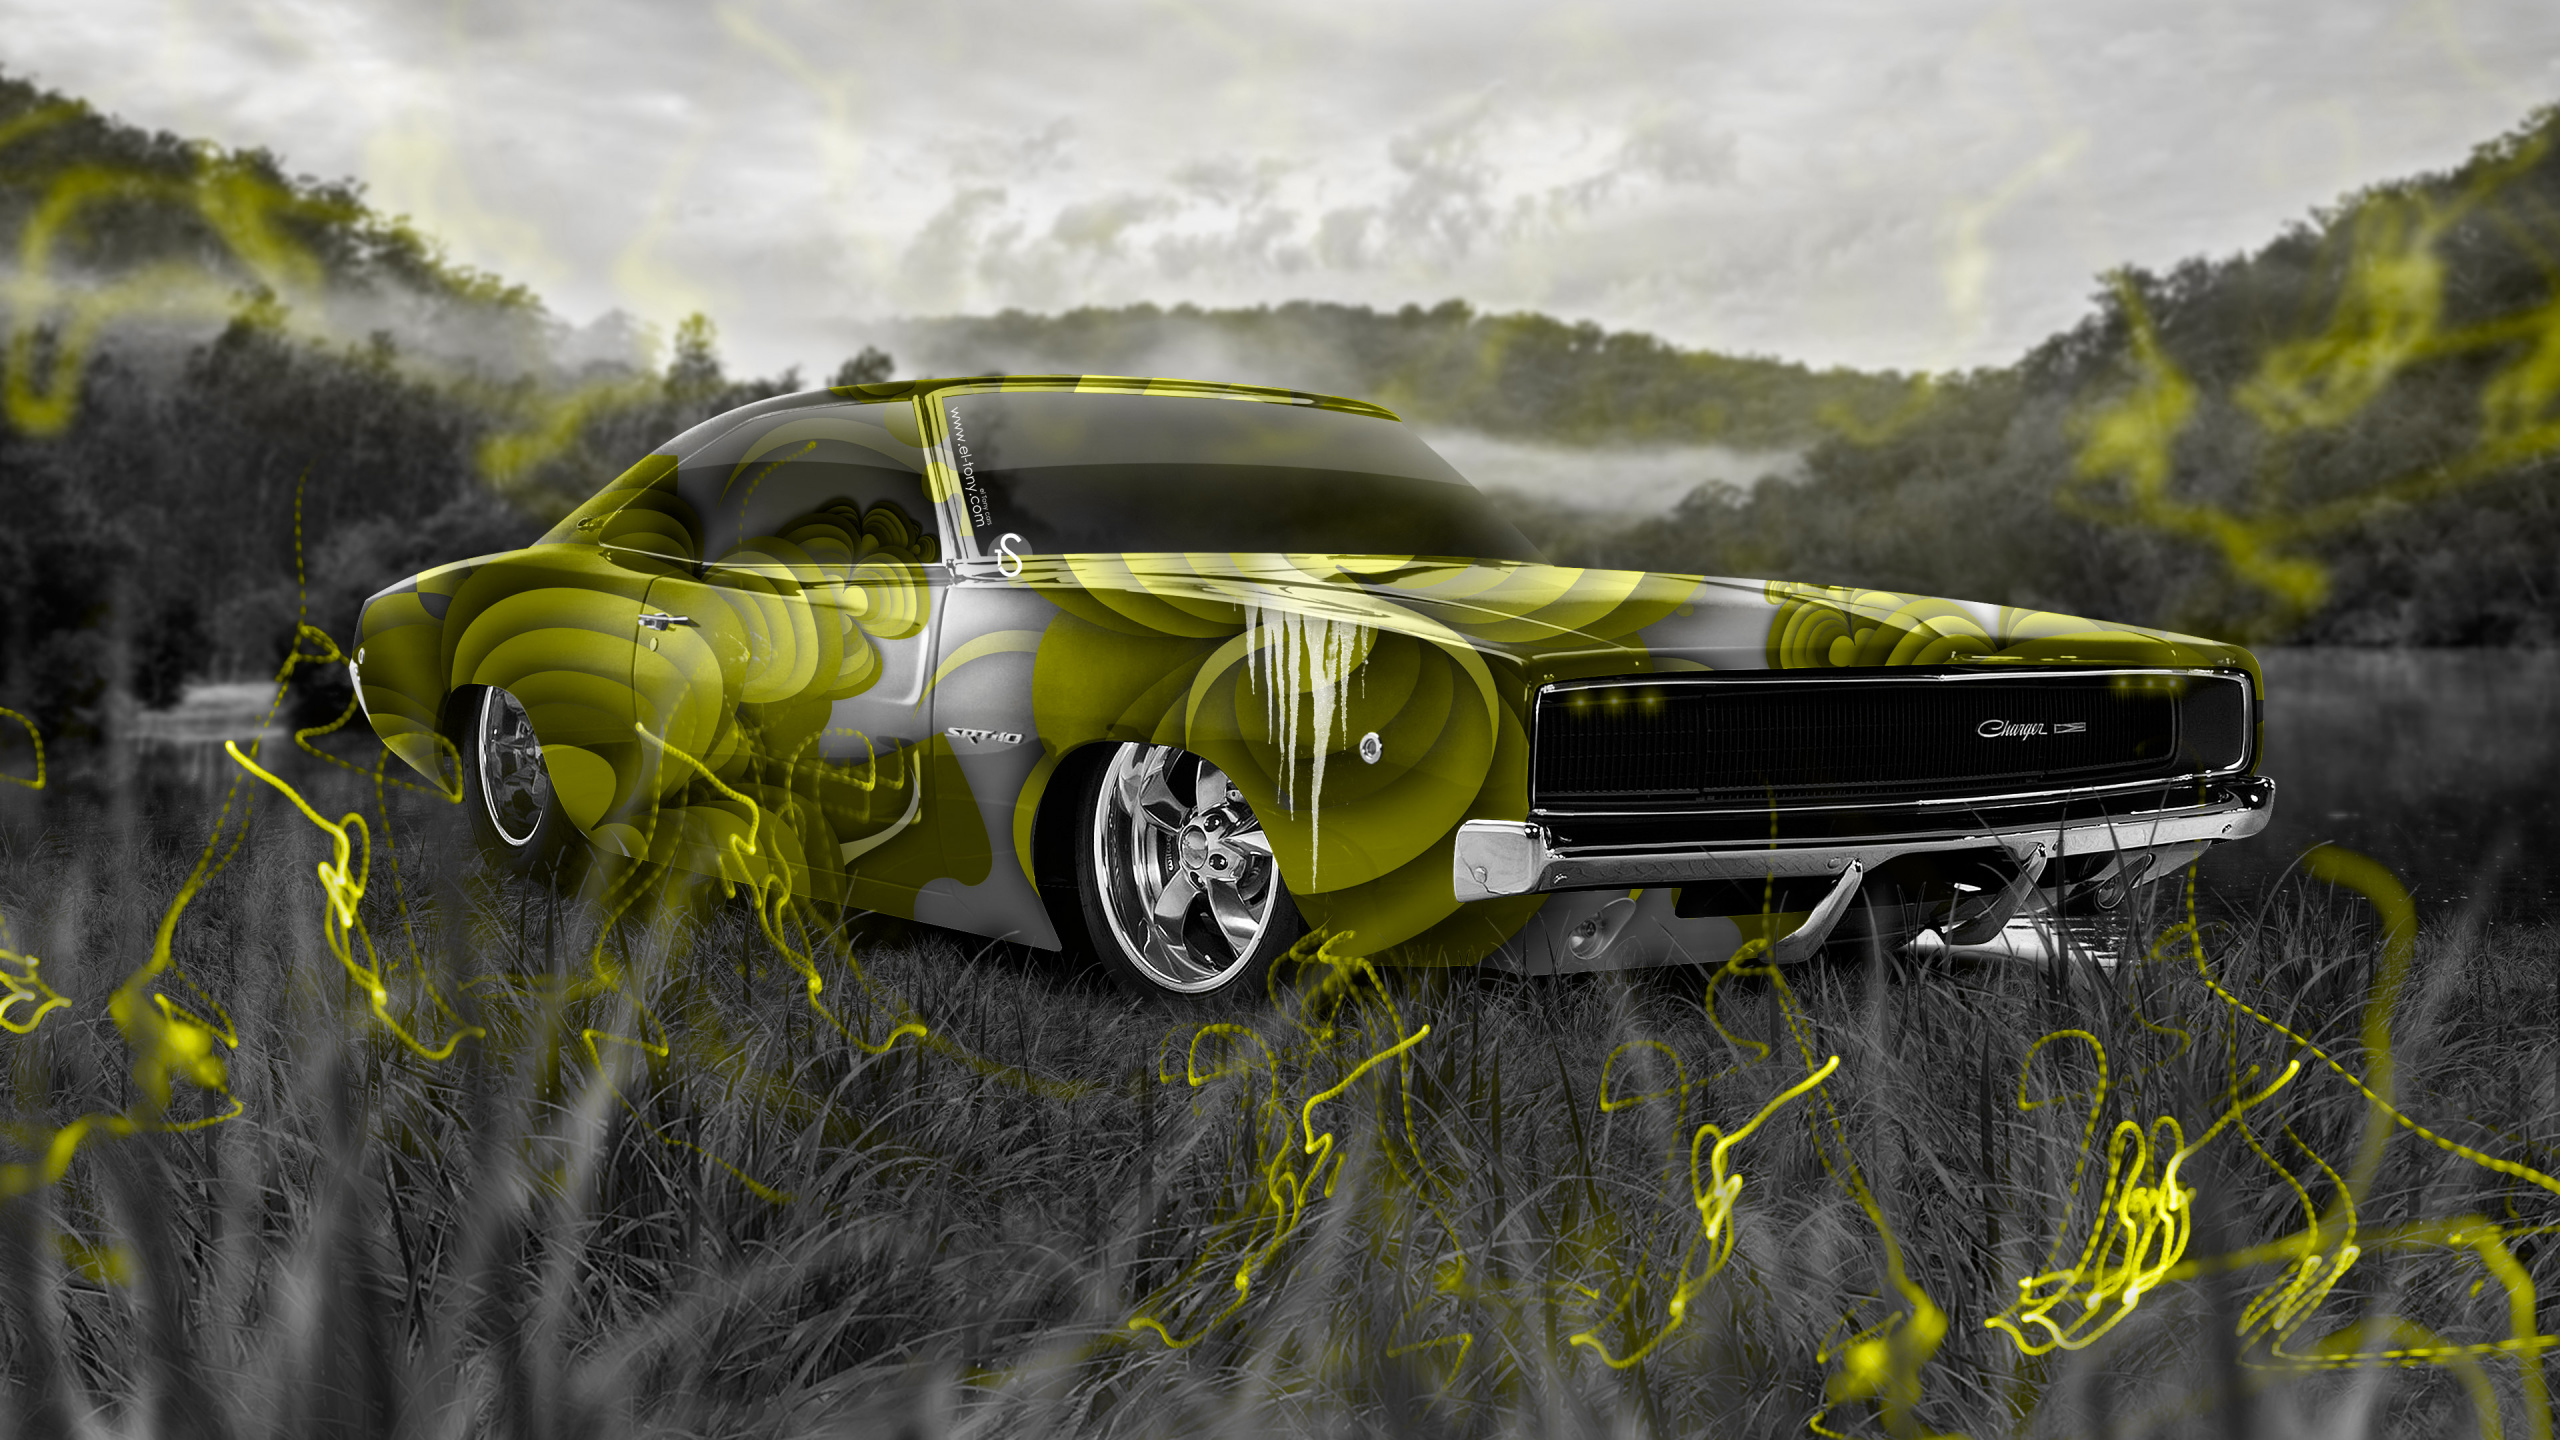 Yellow and Black Chevrolet Camaro on Green Grass Field During Daytime. Wallpaper in 2560x1440 Resolution